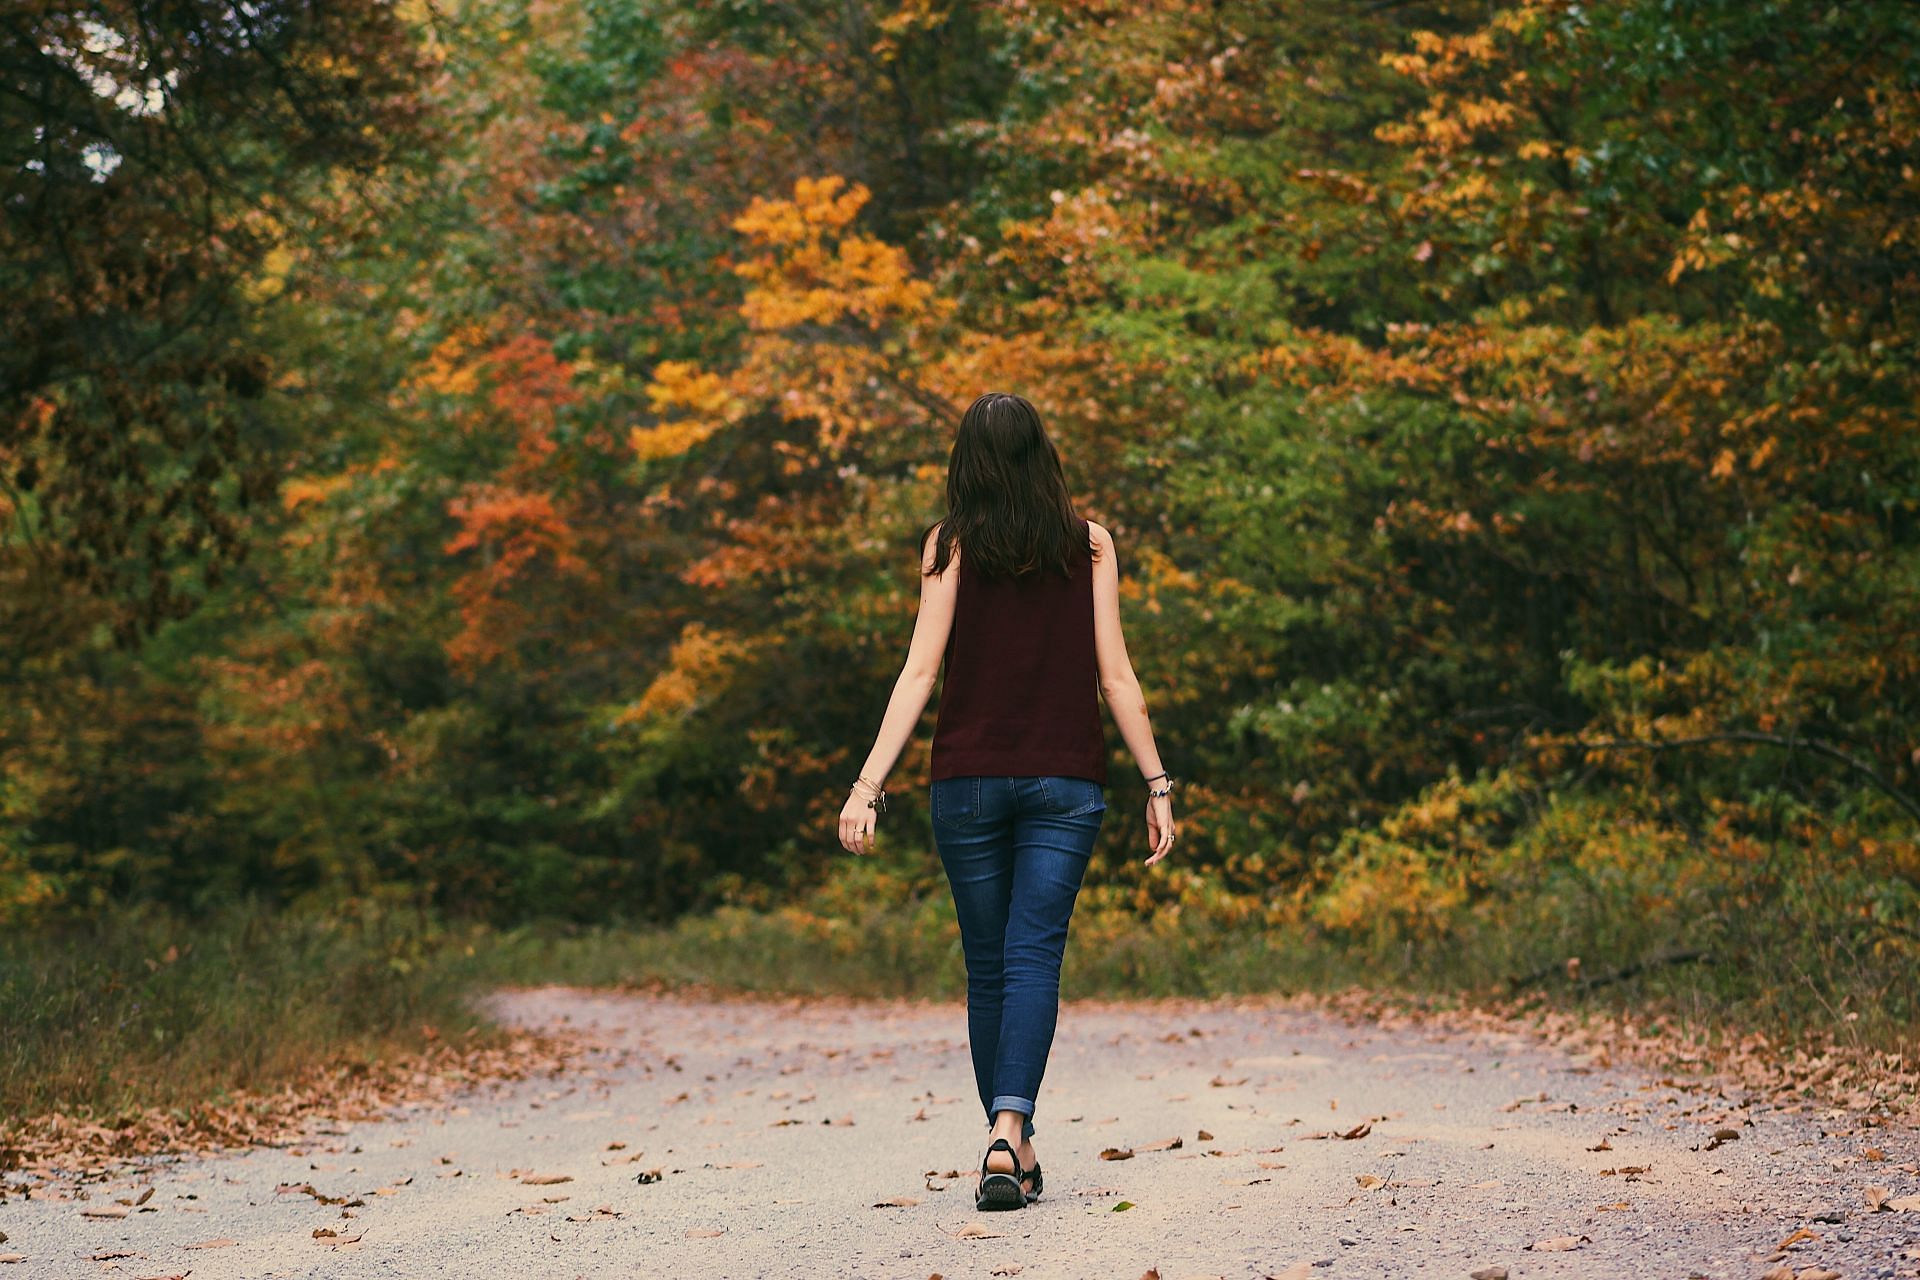 Walking calms your neurological system. (Image via Pexels / Noelle Otto)